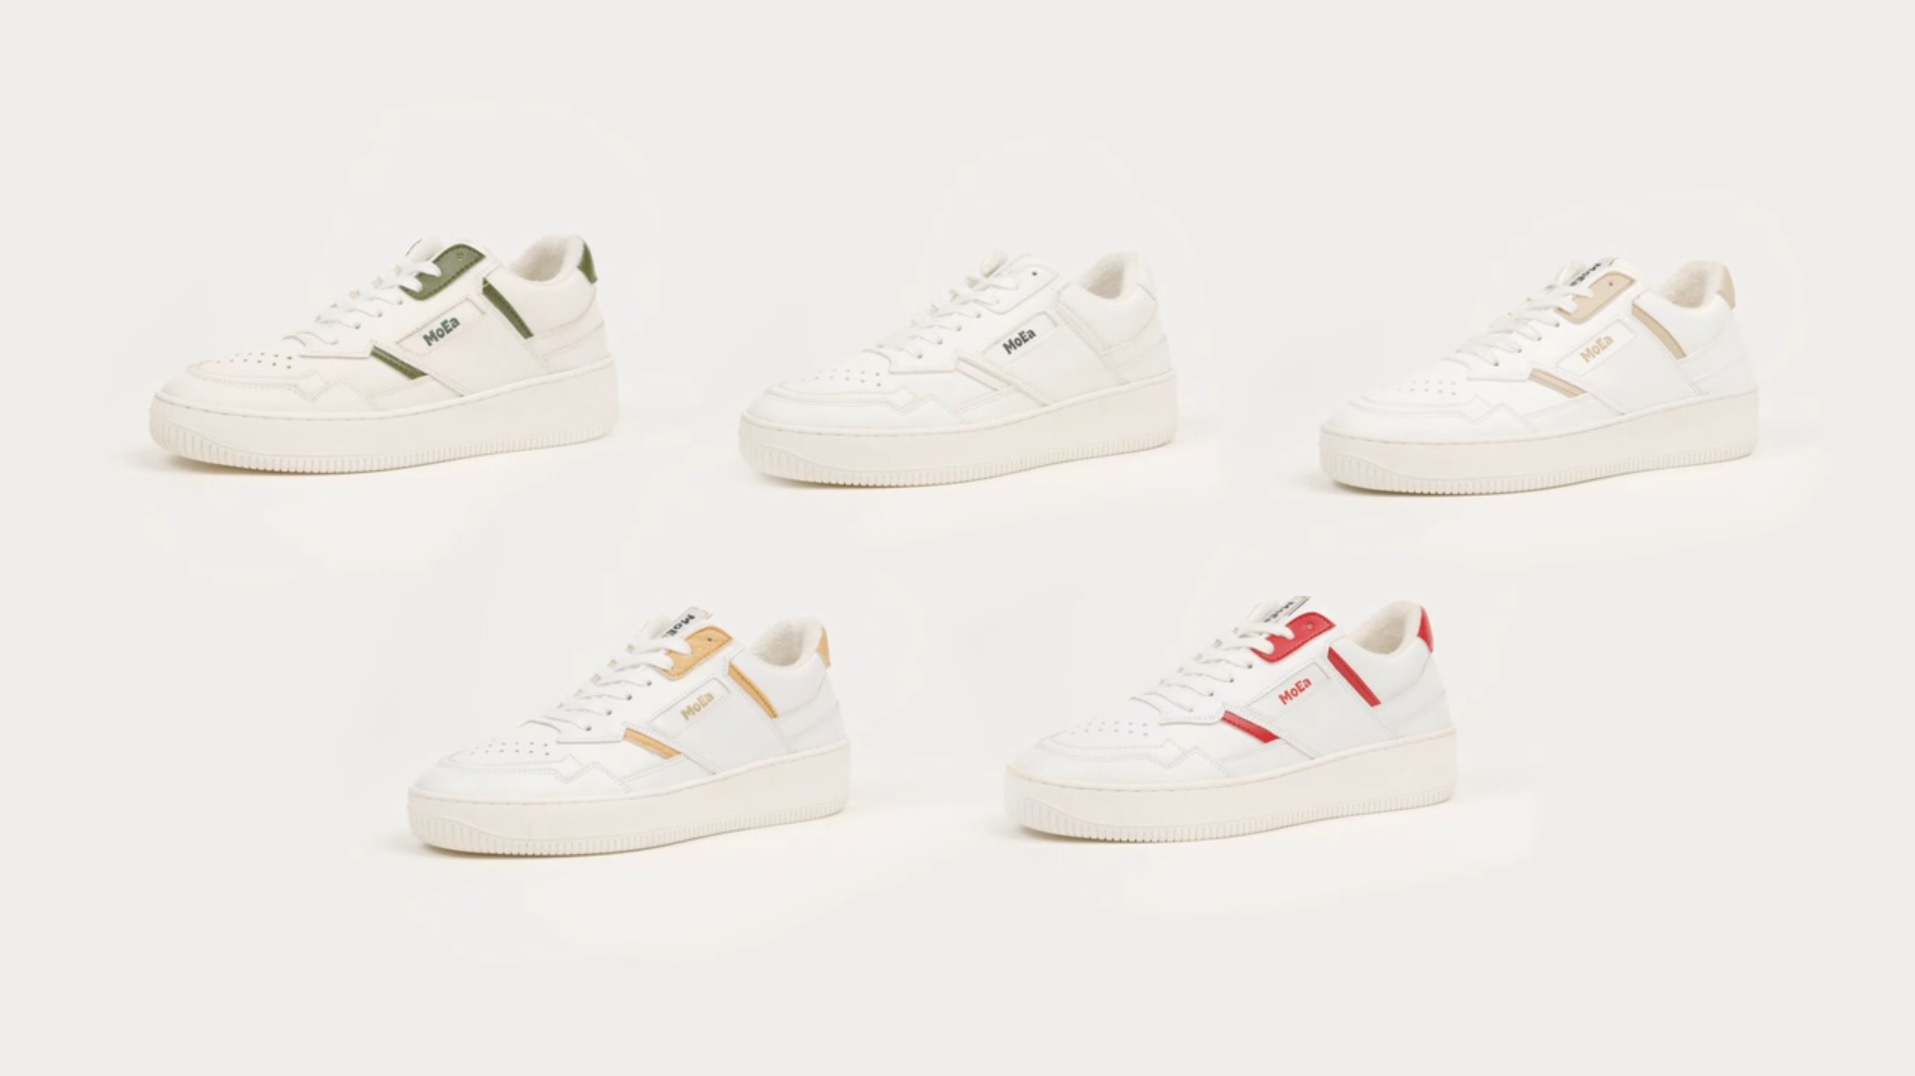 Diverse Intiem Zegevieren These Stylish Sneakers Are Made From Fruits and Plants